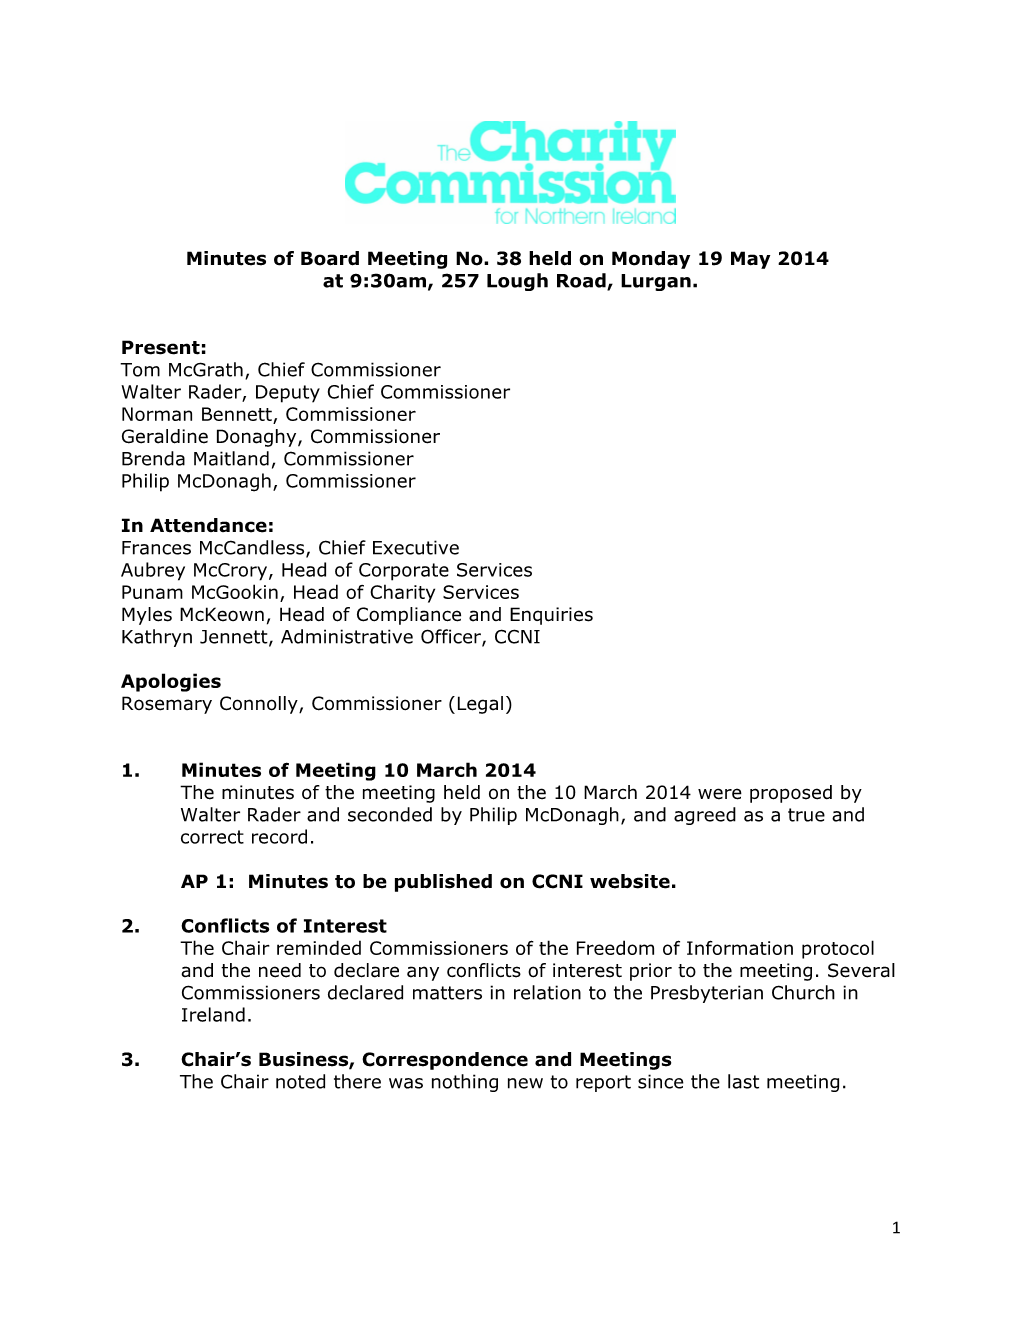 Minutes of Board Meeting No. 38 Held on Monday 19 May 2014